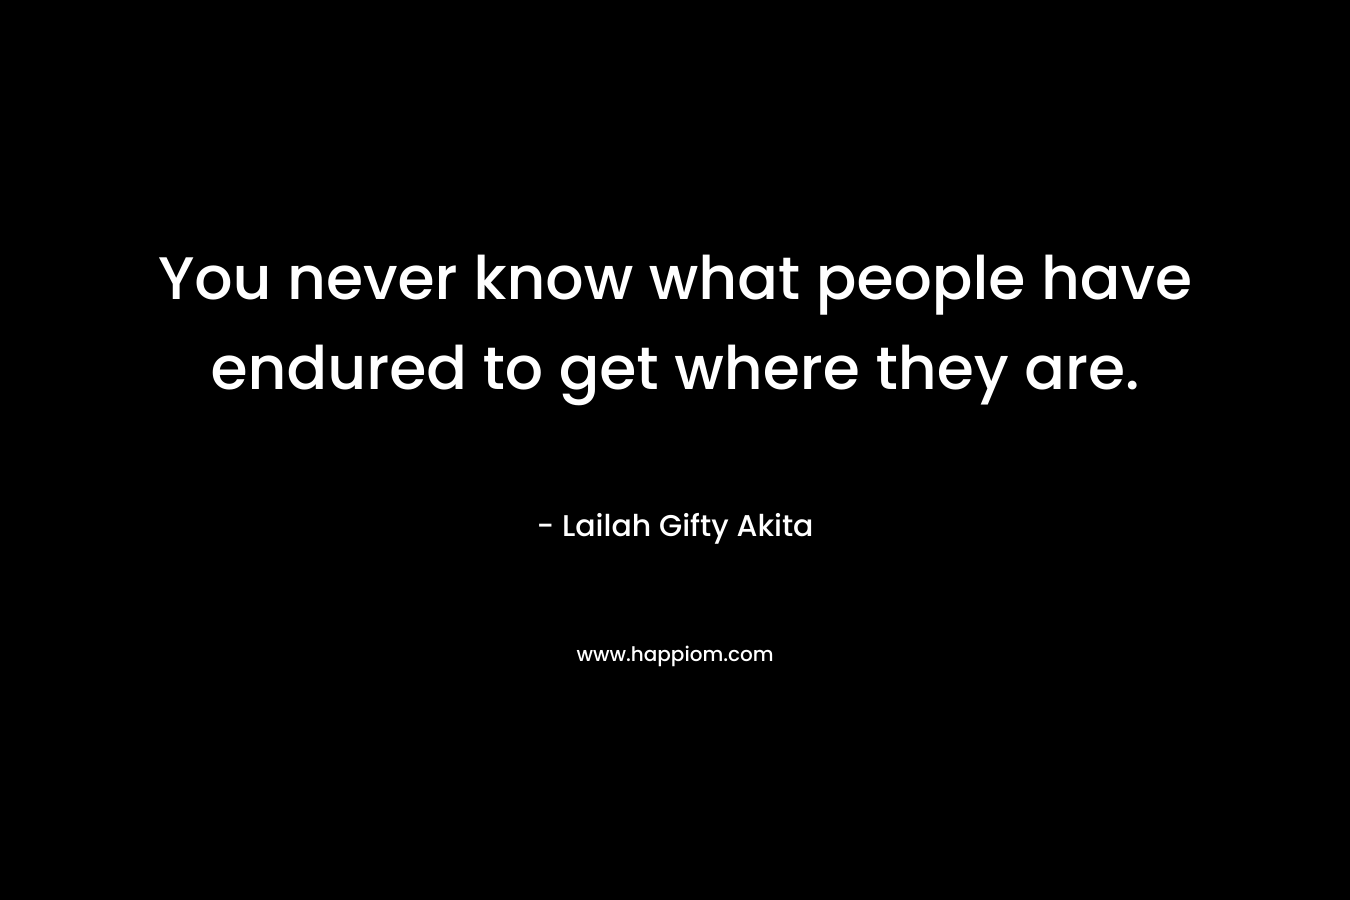 You never know what people have endured to get where they are.